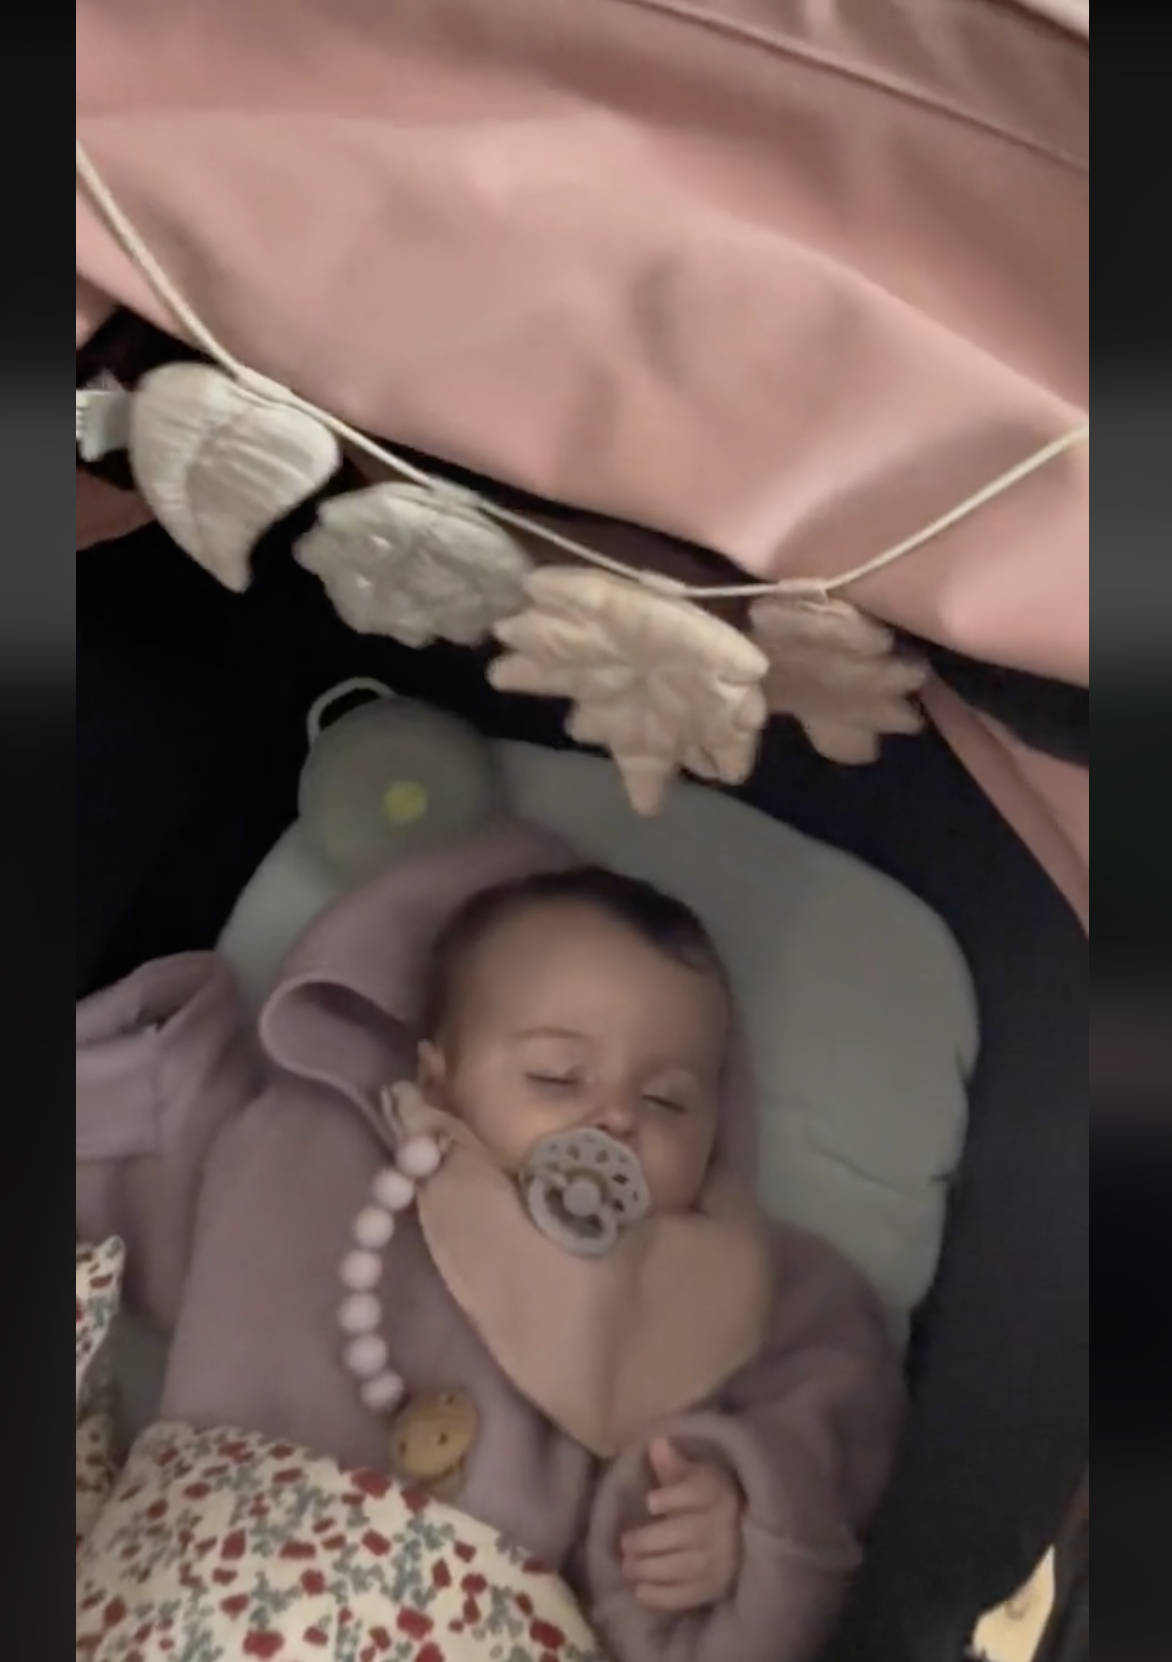 Annie Samples' little baby girl sleeps peacefully in her stroller, as seen in a video dated September 27, 2022 | Source: tiktok.com/@annieineventyrland